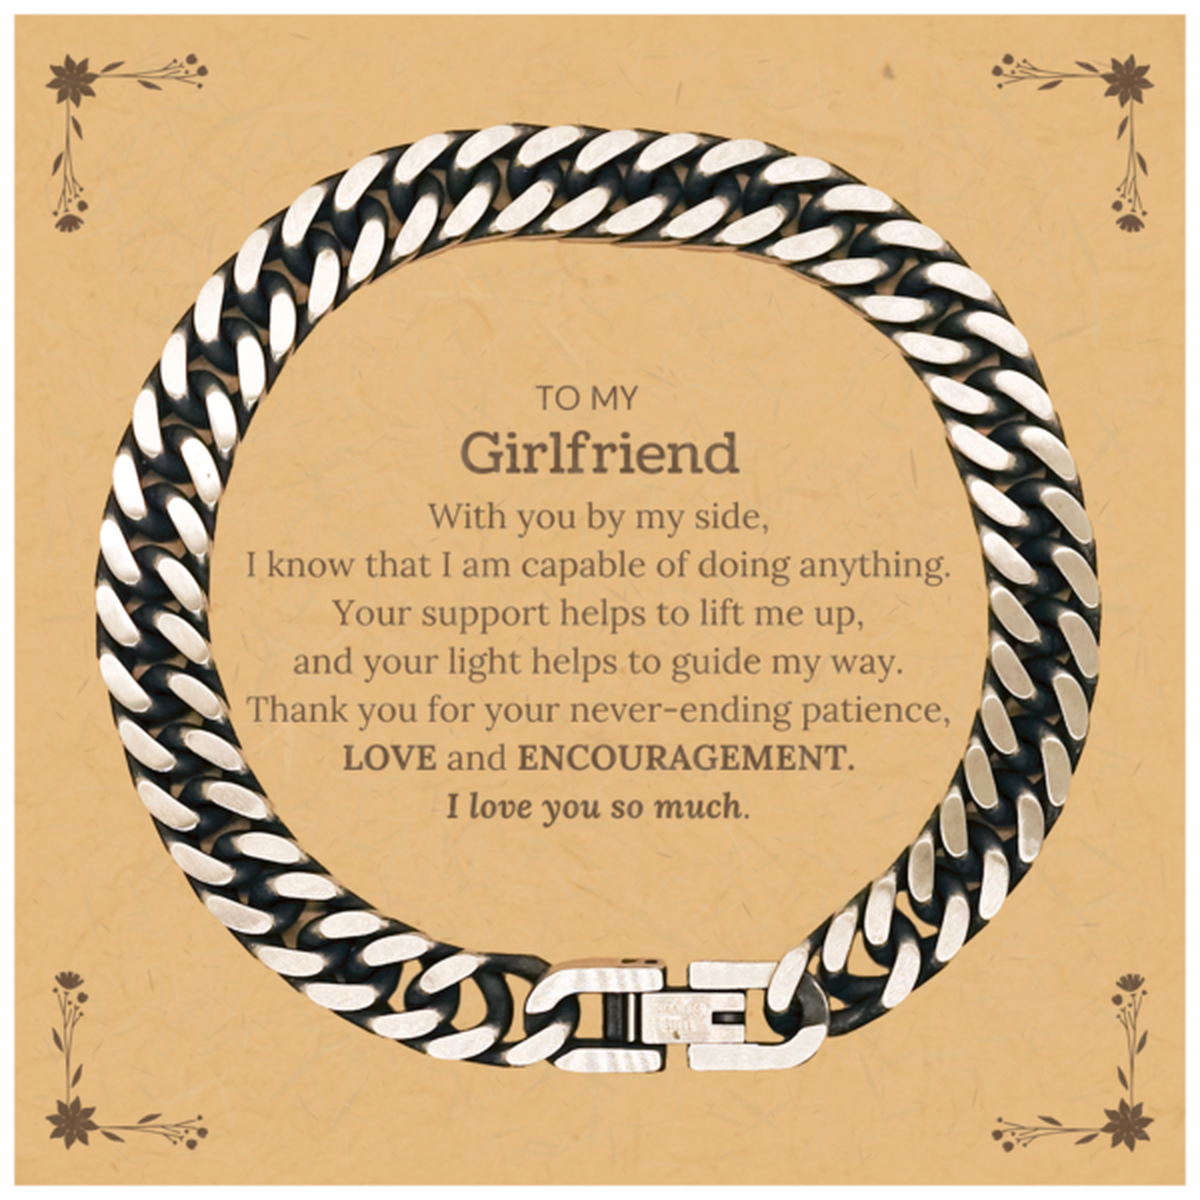 Appreciation Girlfriend Cuban Link Chain Bracelet Gifts, To My Girlfriend Birthday Christmas Wedding Keepsake Gifts for Girlfriend With you by my side, I know that I am capable of doing anything. I love you so much